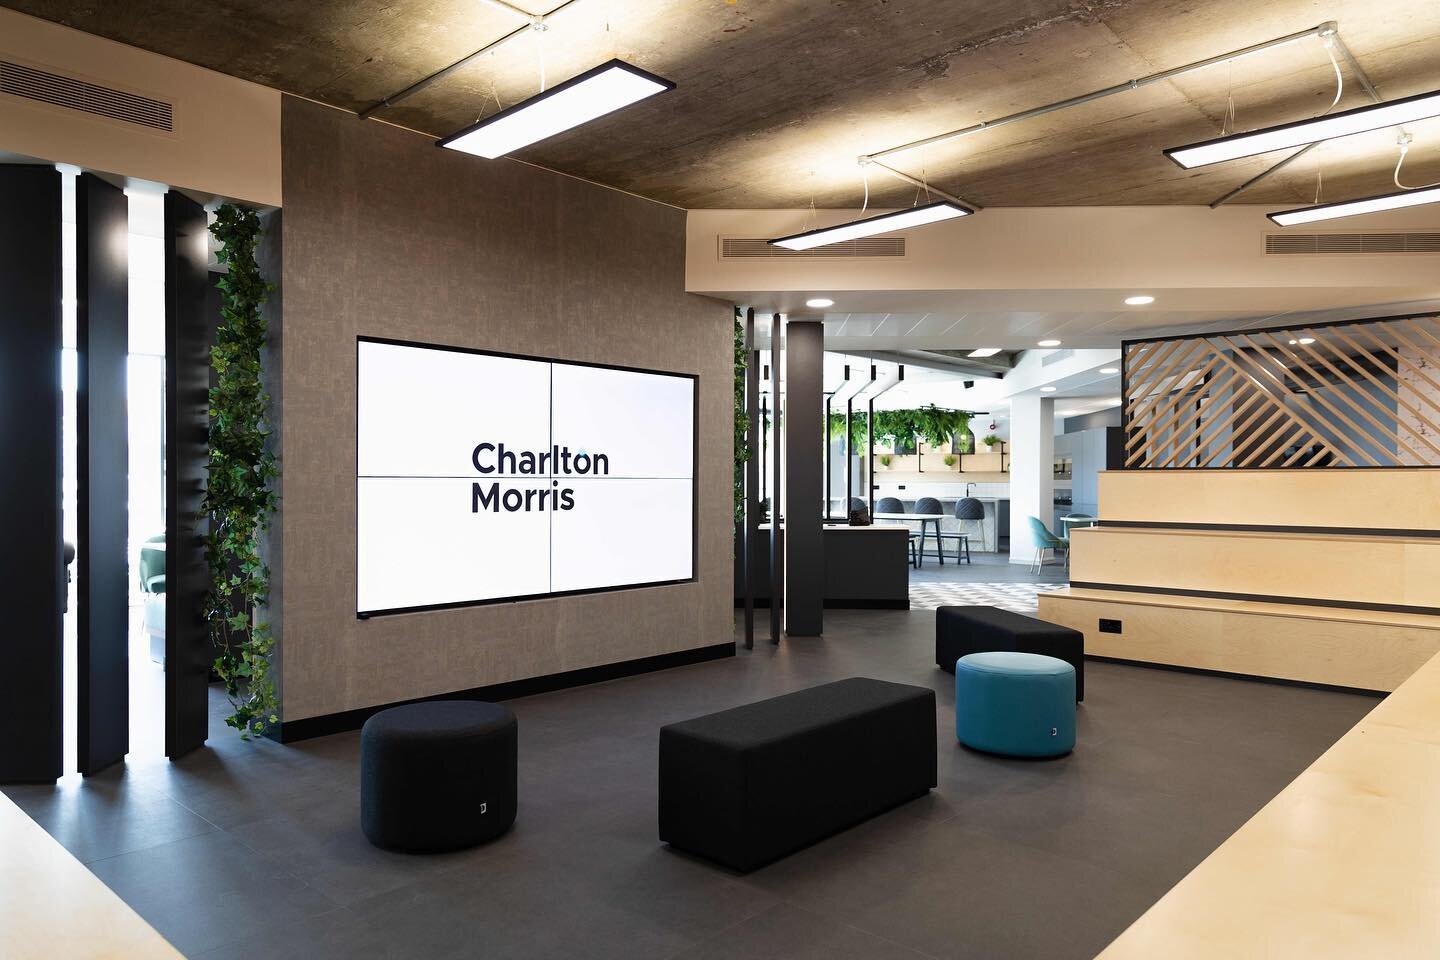 Our tenants @charlton.morris seriously set the standard for how to kit out an office. Here&rsquo;s what Andy Shatwell, CEO, has to say about how they see their space...

&ldquo;Having an amazing office is one of the few ways that you can show the wor